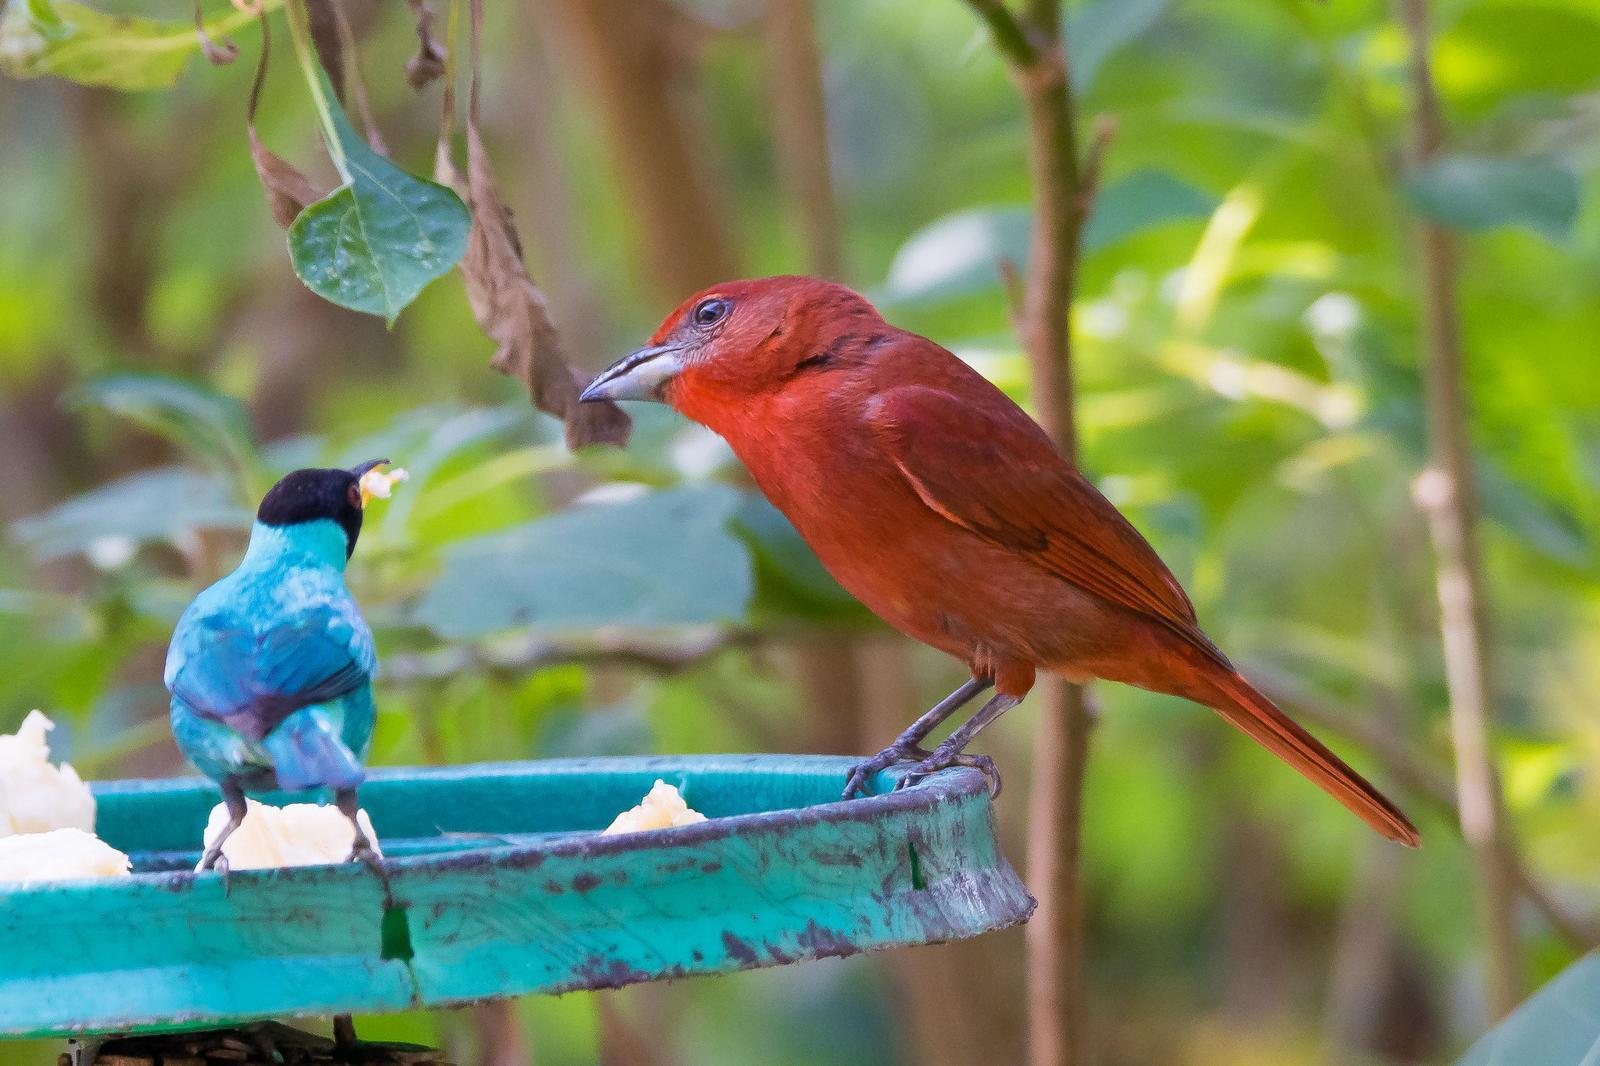 Hepatic Tanager Photo by Gerald Hoekstra